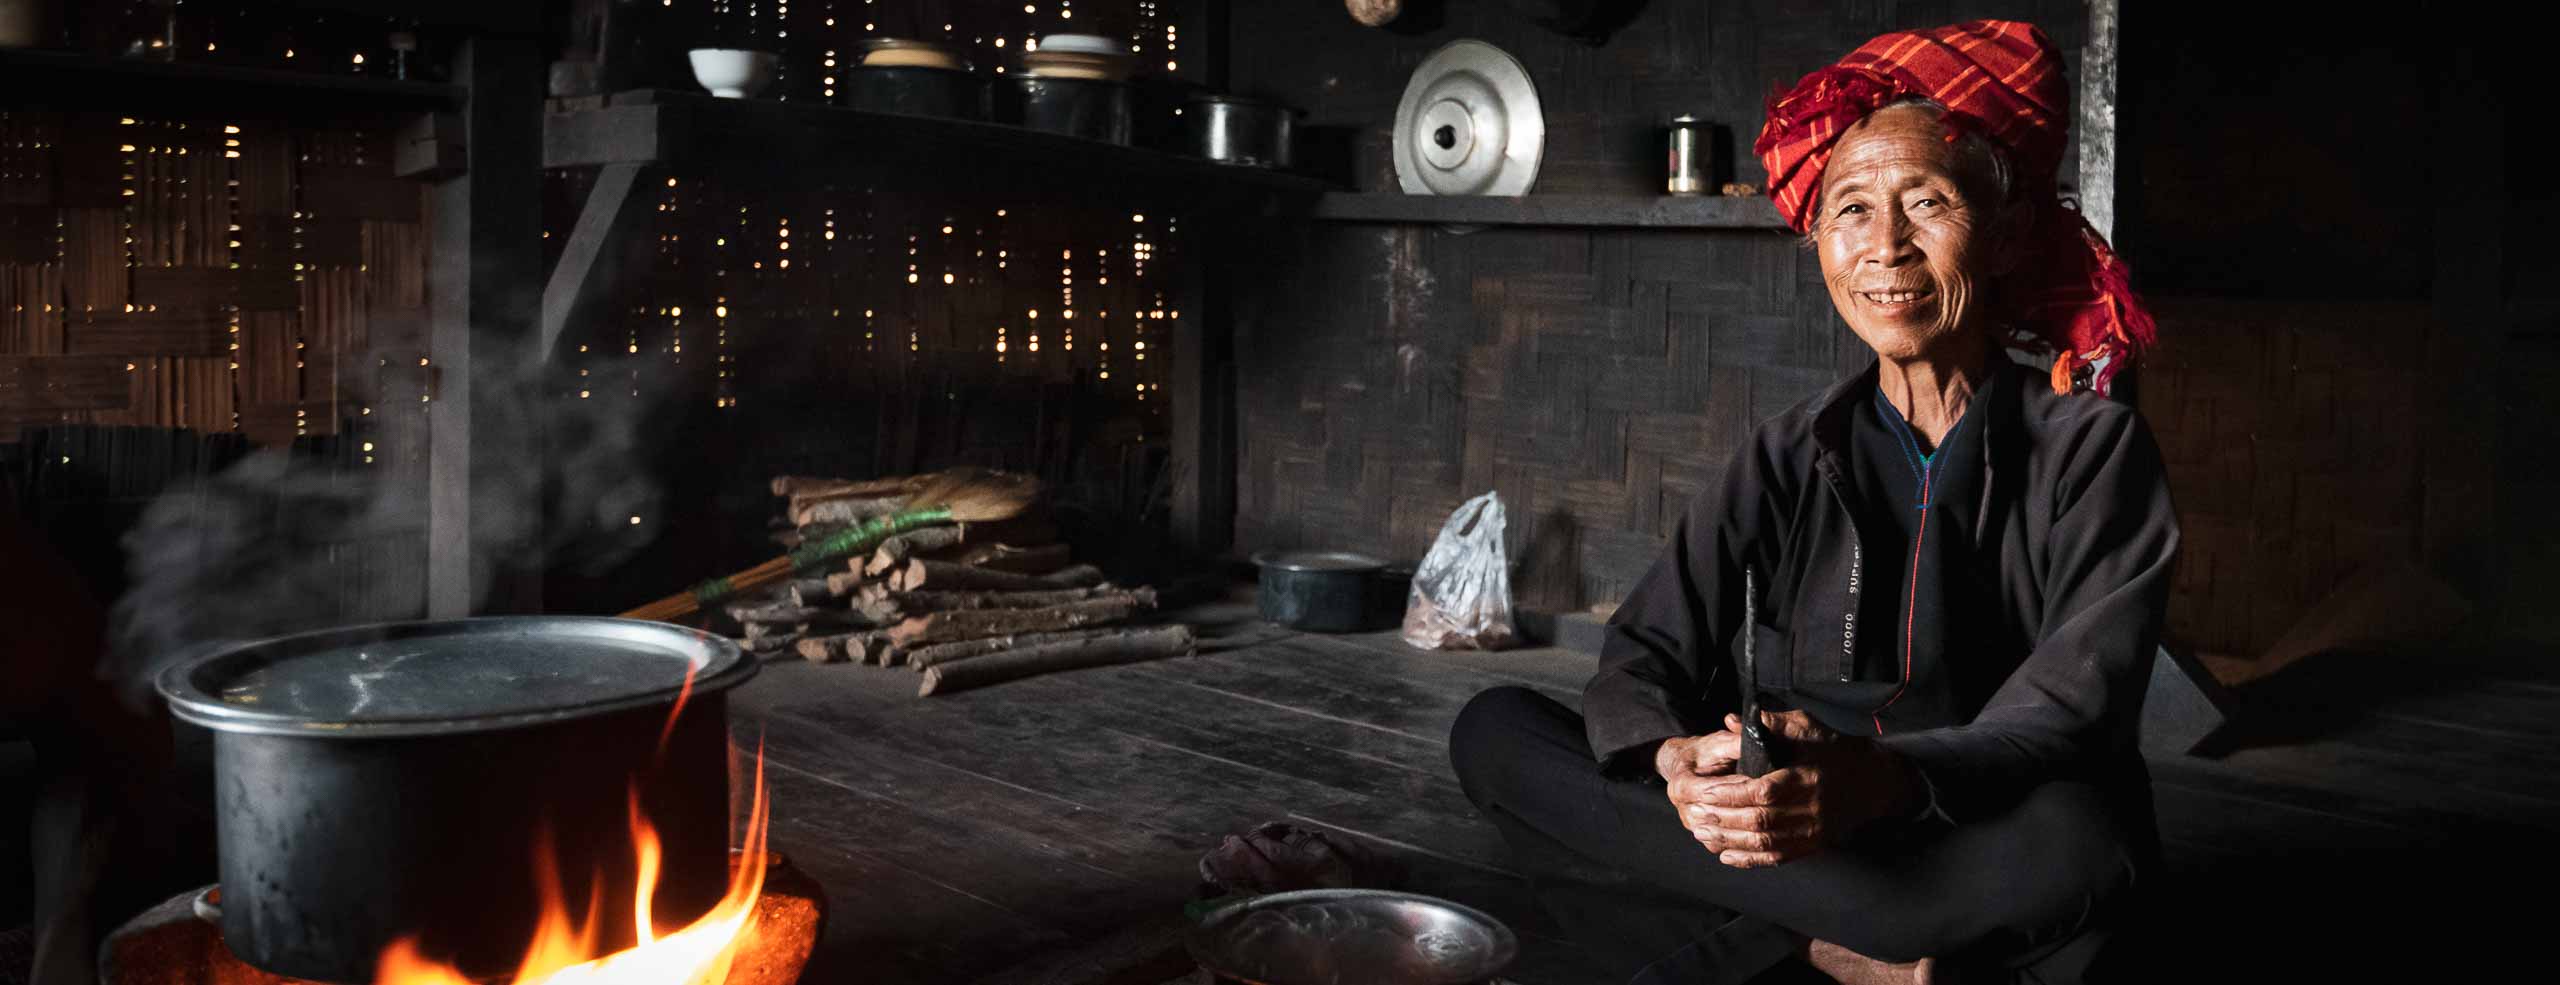 A woman of the Pao ethnic group sits by the fire in her wooden house in Shan State in Burma, Myanmar, Southeast Asia